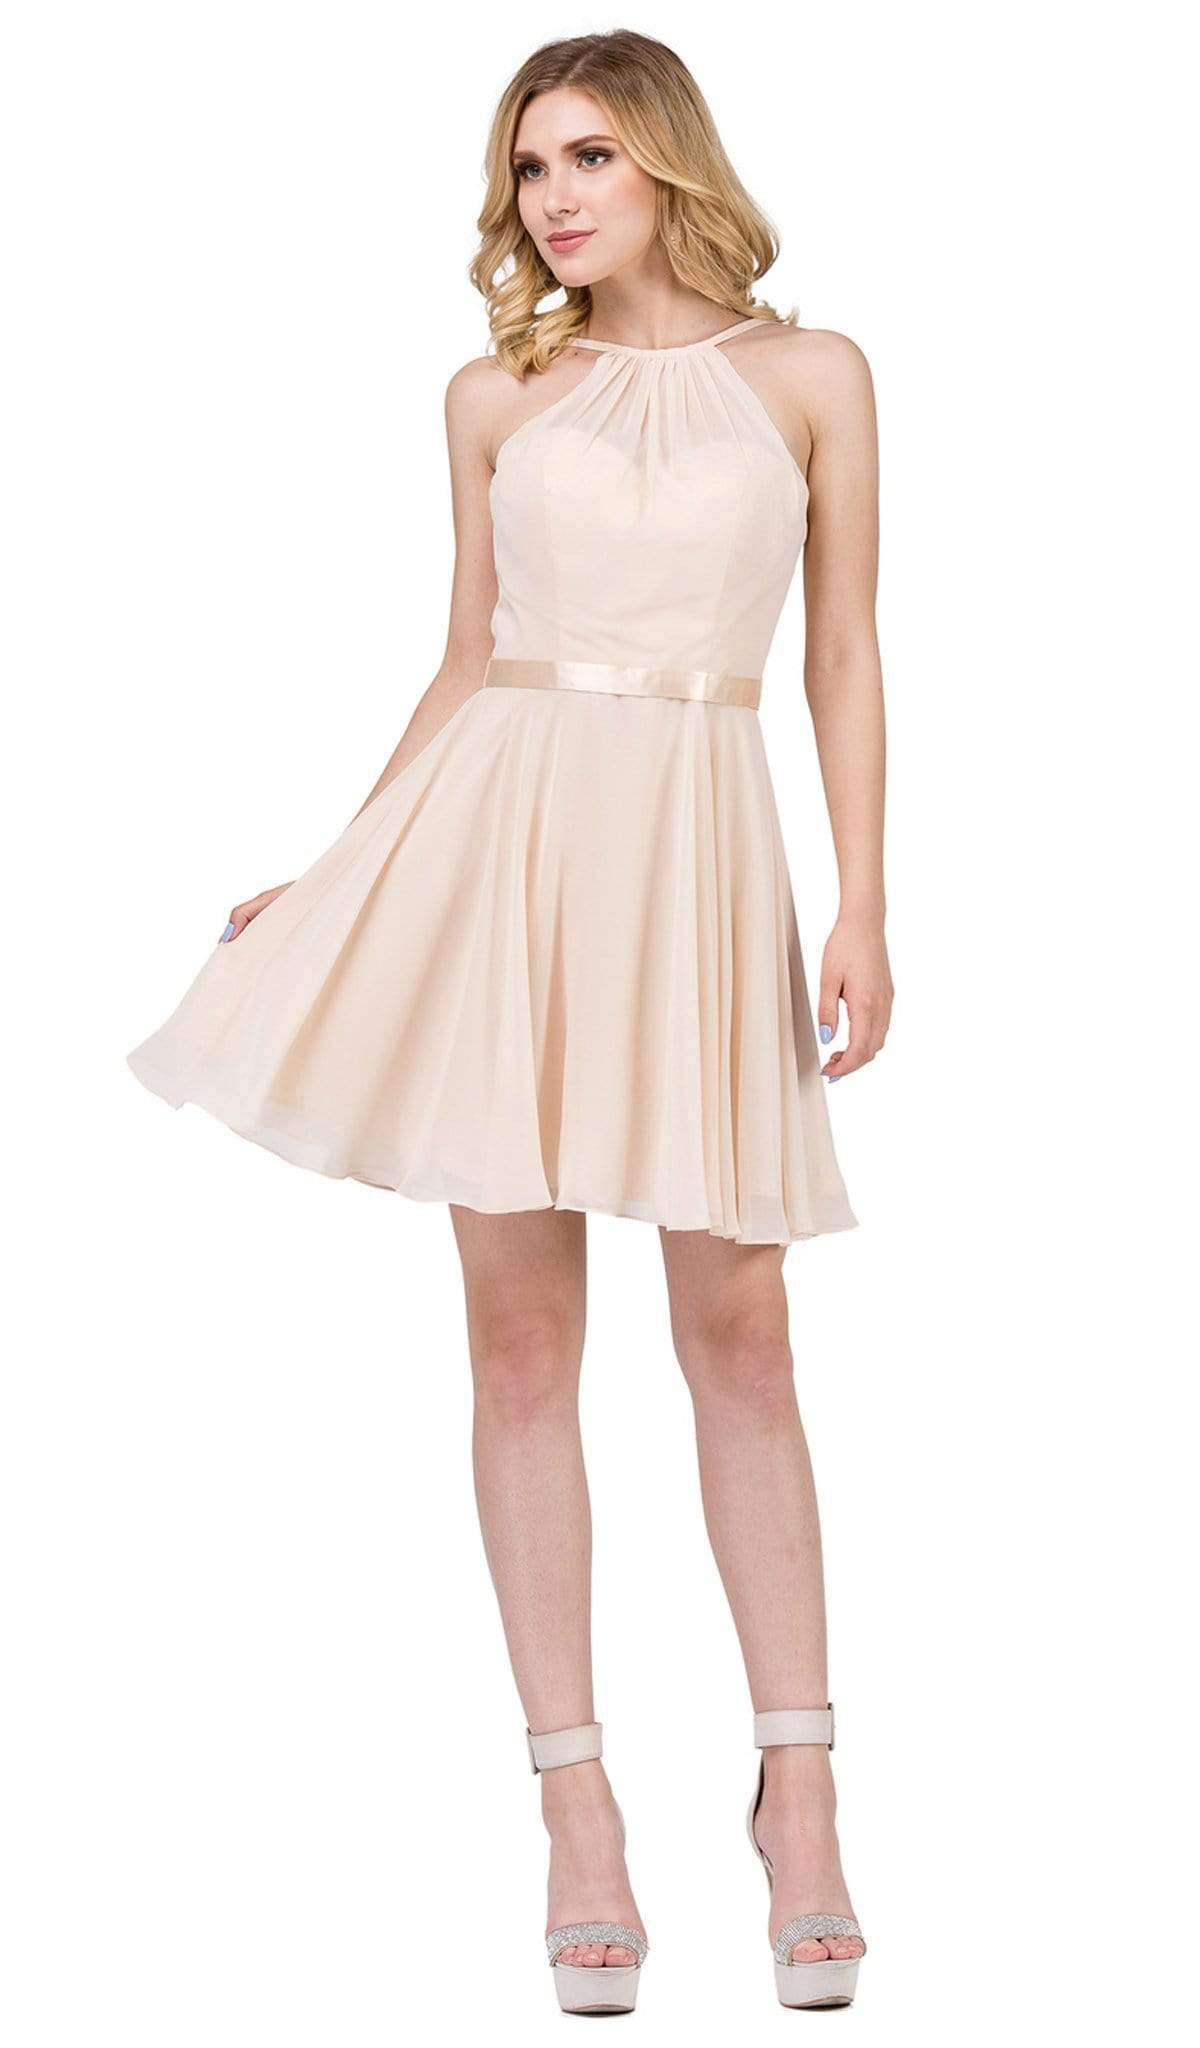 Dancing Queen - 3013 Halter Style Sleeveless Chiffon Cocktail Dress Cocktail Dresses XS / Champagne